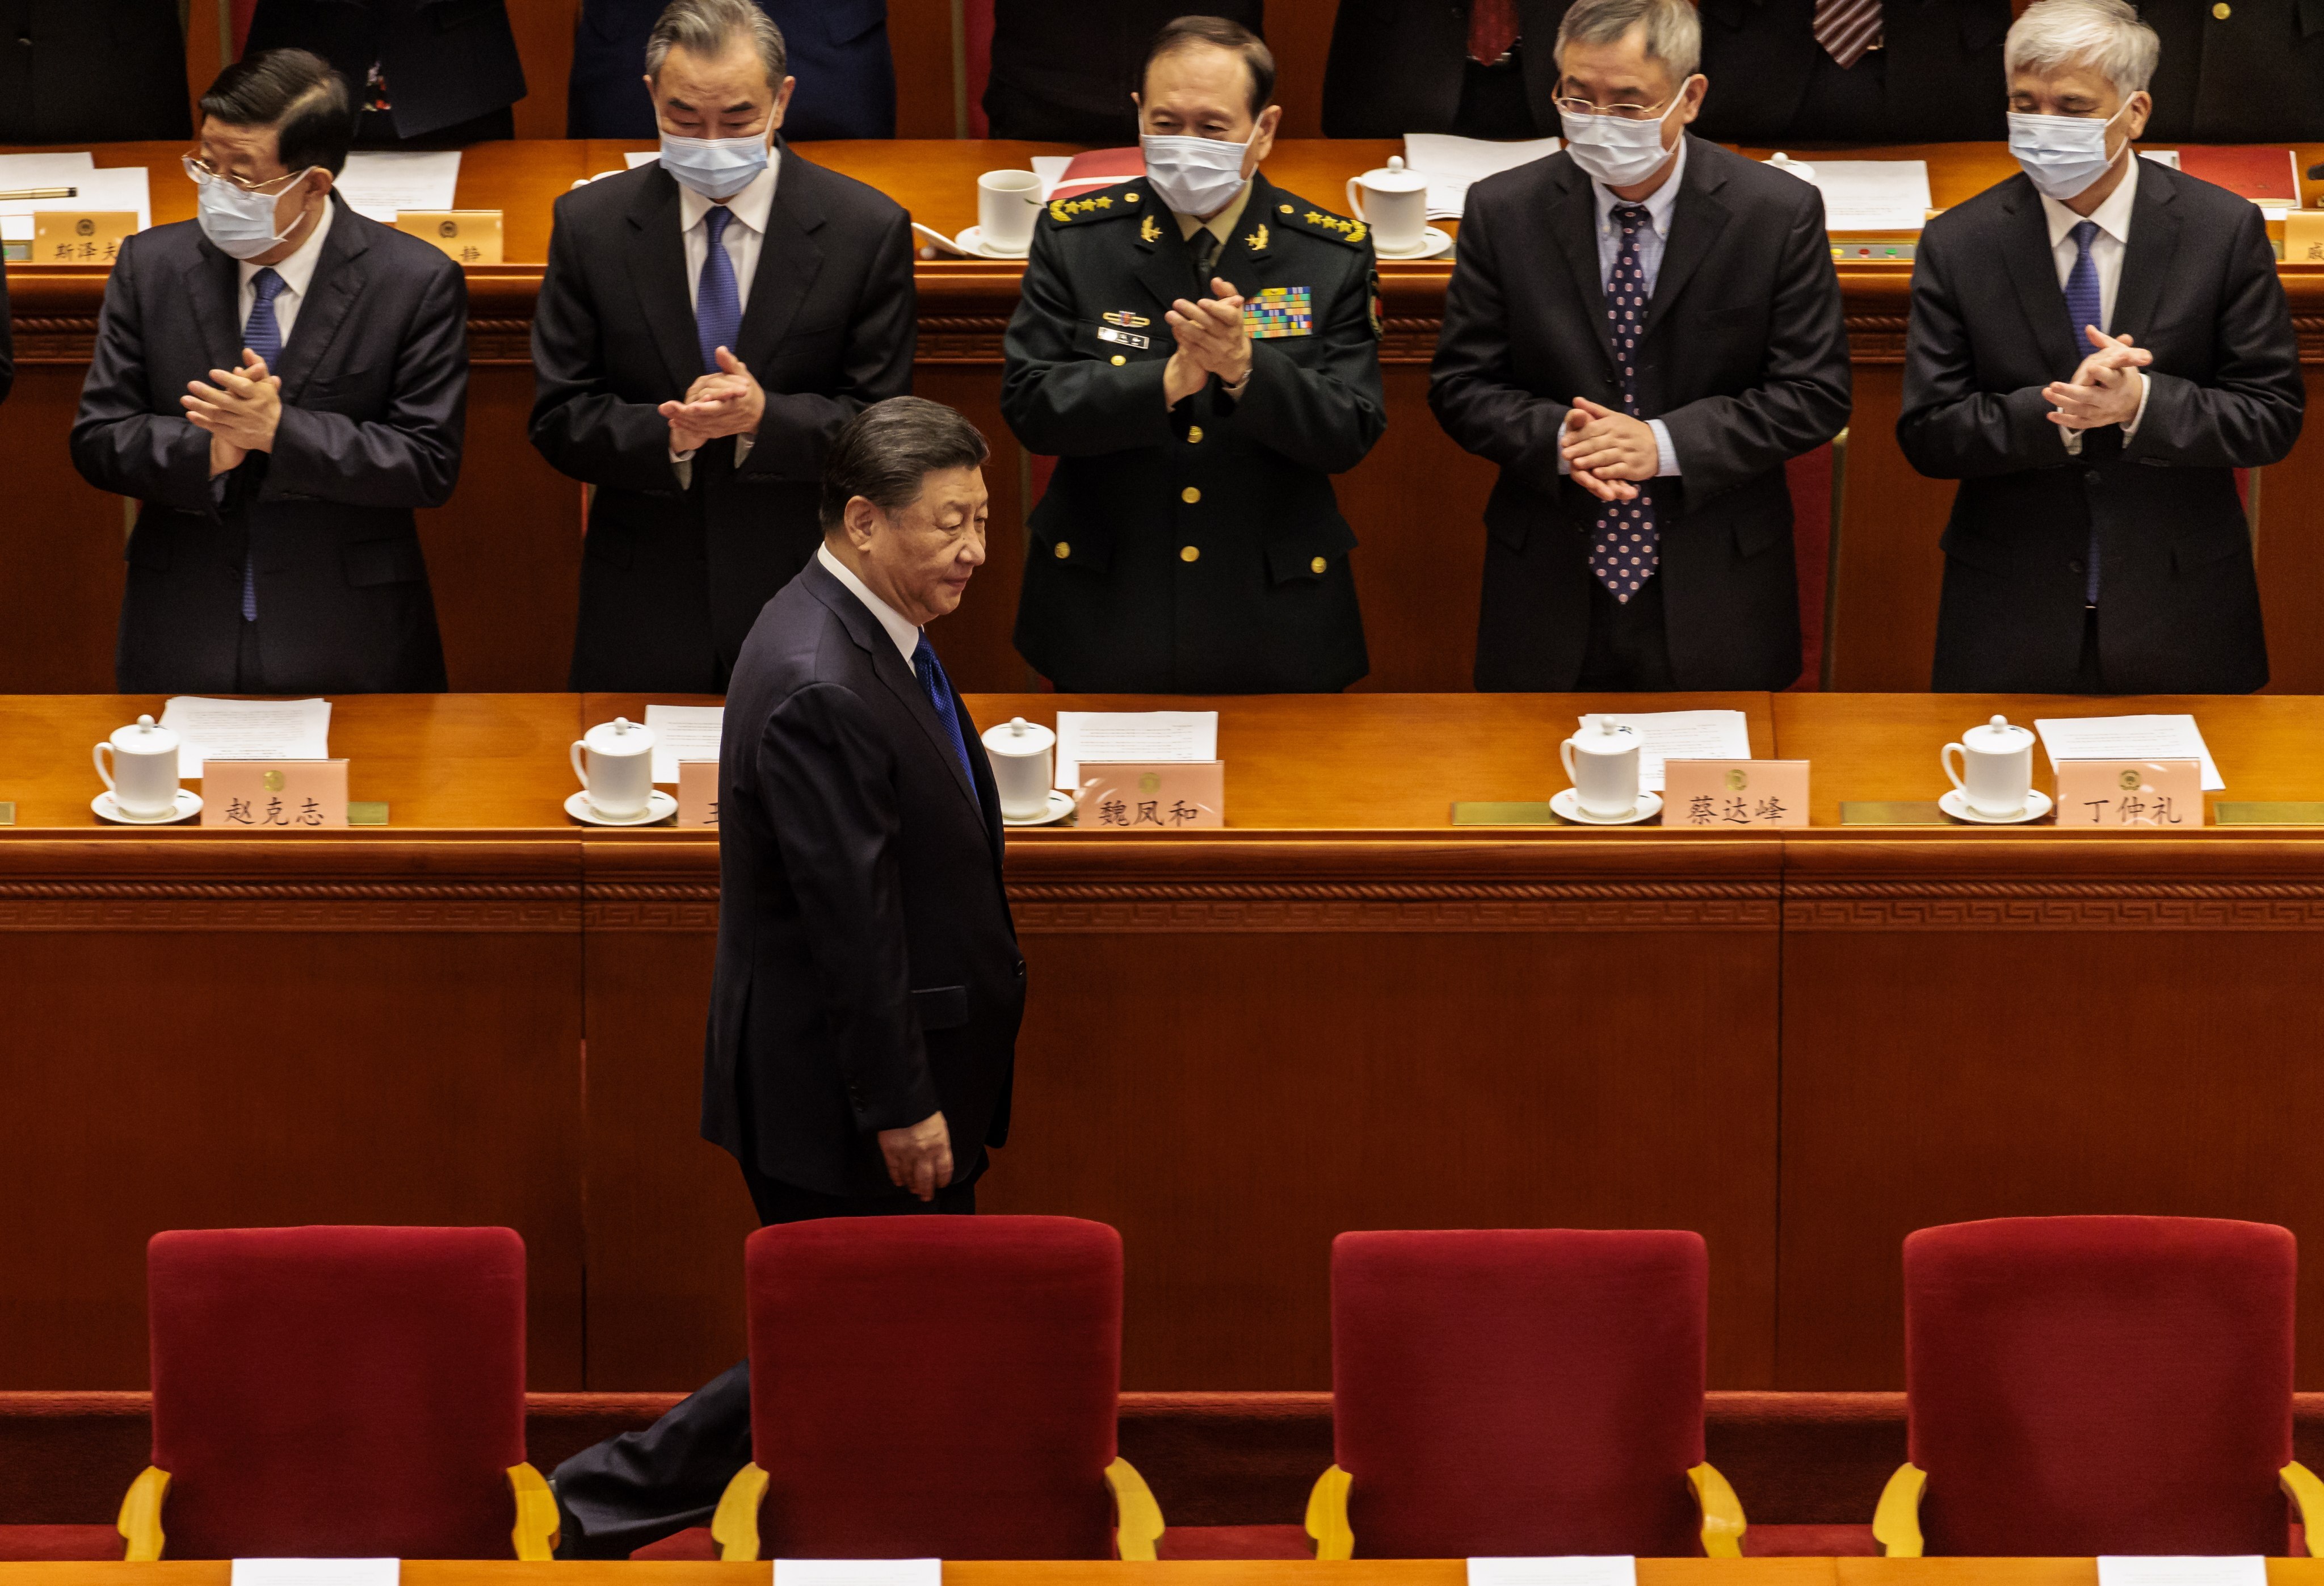 Chinese President Xi Jinping arrives for the closing session of the Chinese People’s Political Consultative Conference (CPPCC) at the Great Hall of the People, in Beijing, on March 10. China holds two major annual political meetings, The National People’s Congress (NPC) and the CPPCC, known as ‘Lianghui’ or ‘Two Sessions’.  Photo: EPA-EFE